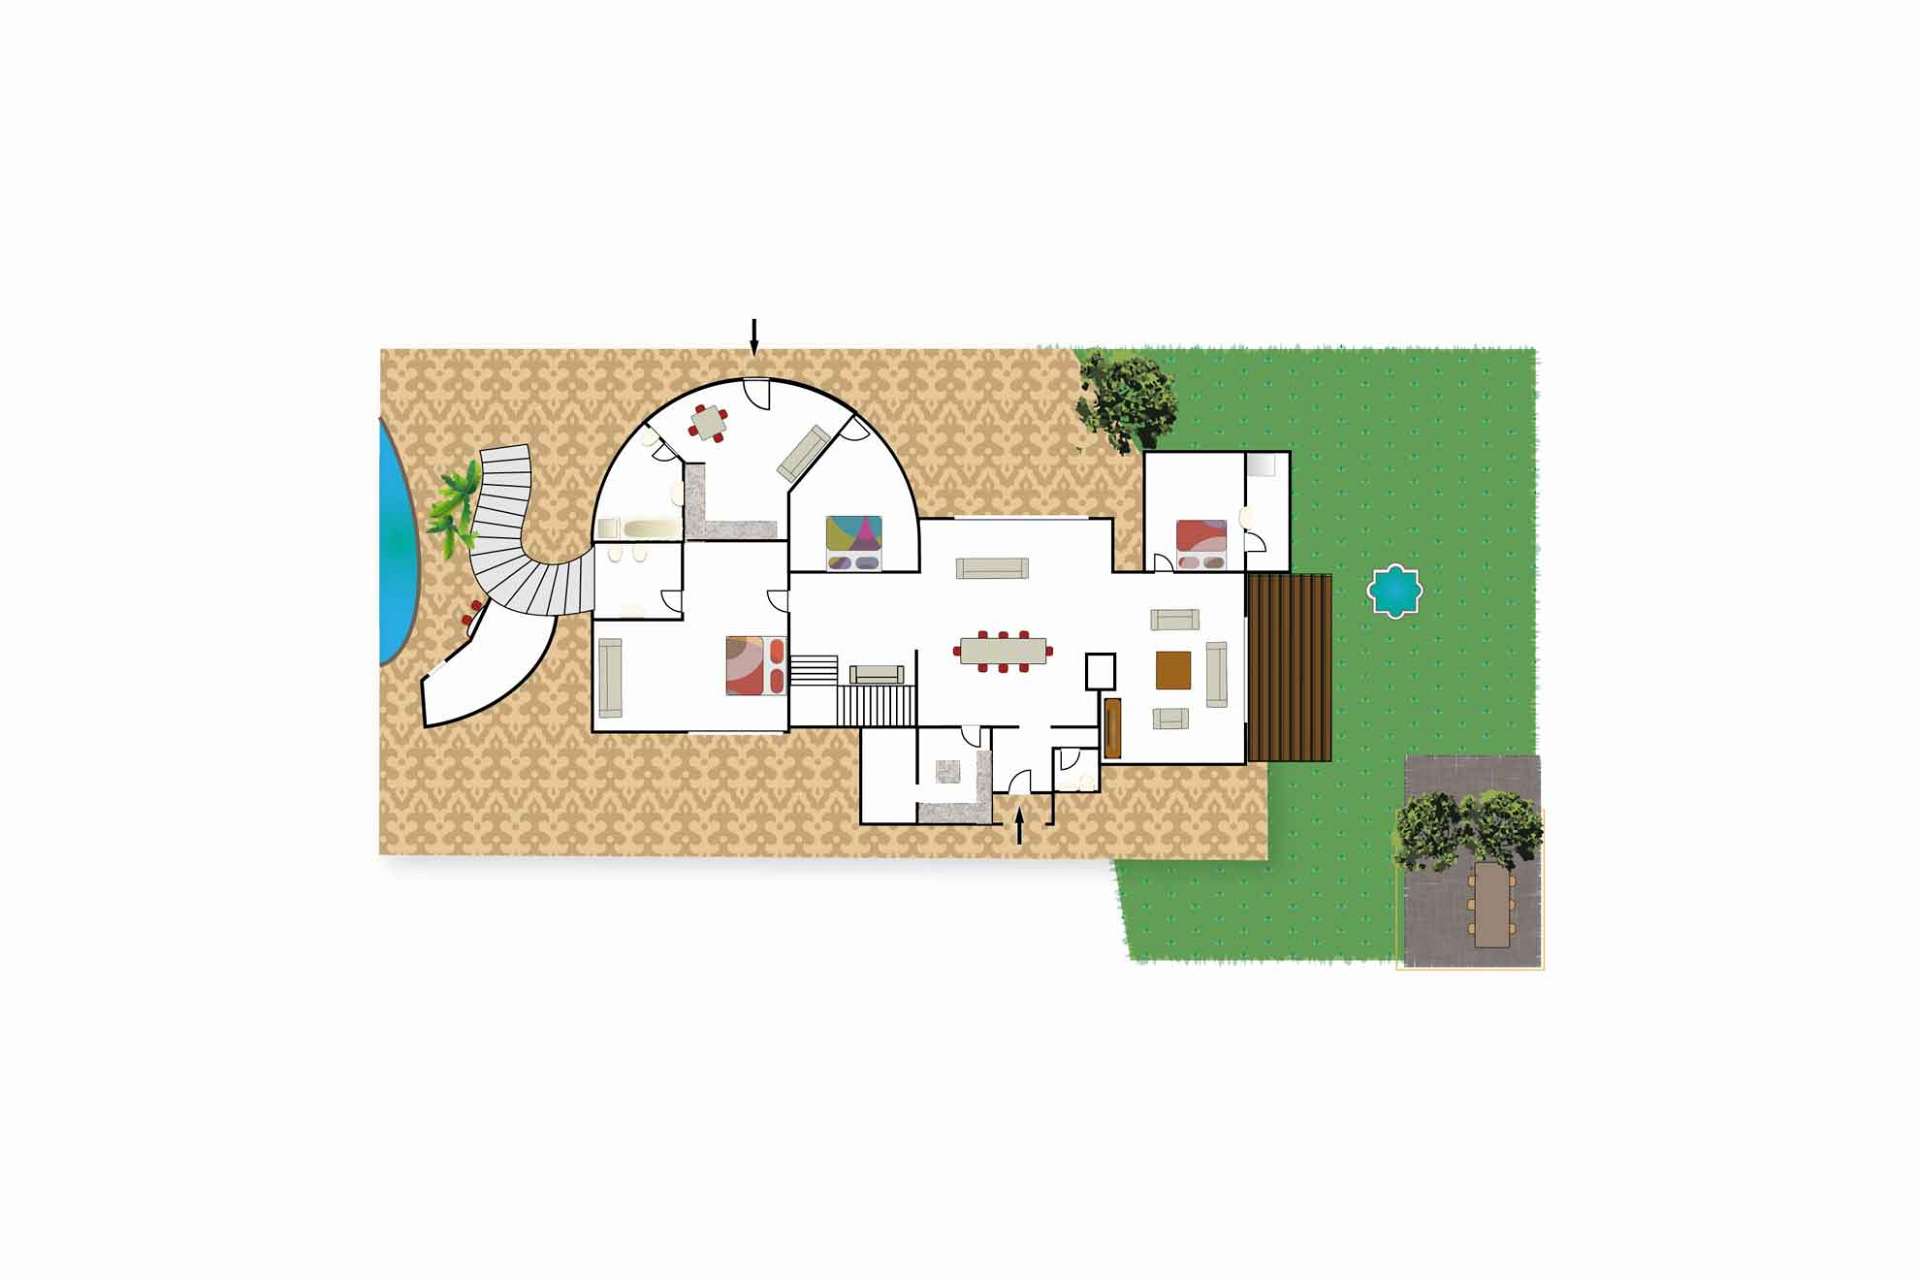 Layout ground floor Villa Andalucía, Chayofa, Tenerife. Not drawn in scale.